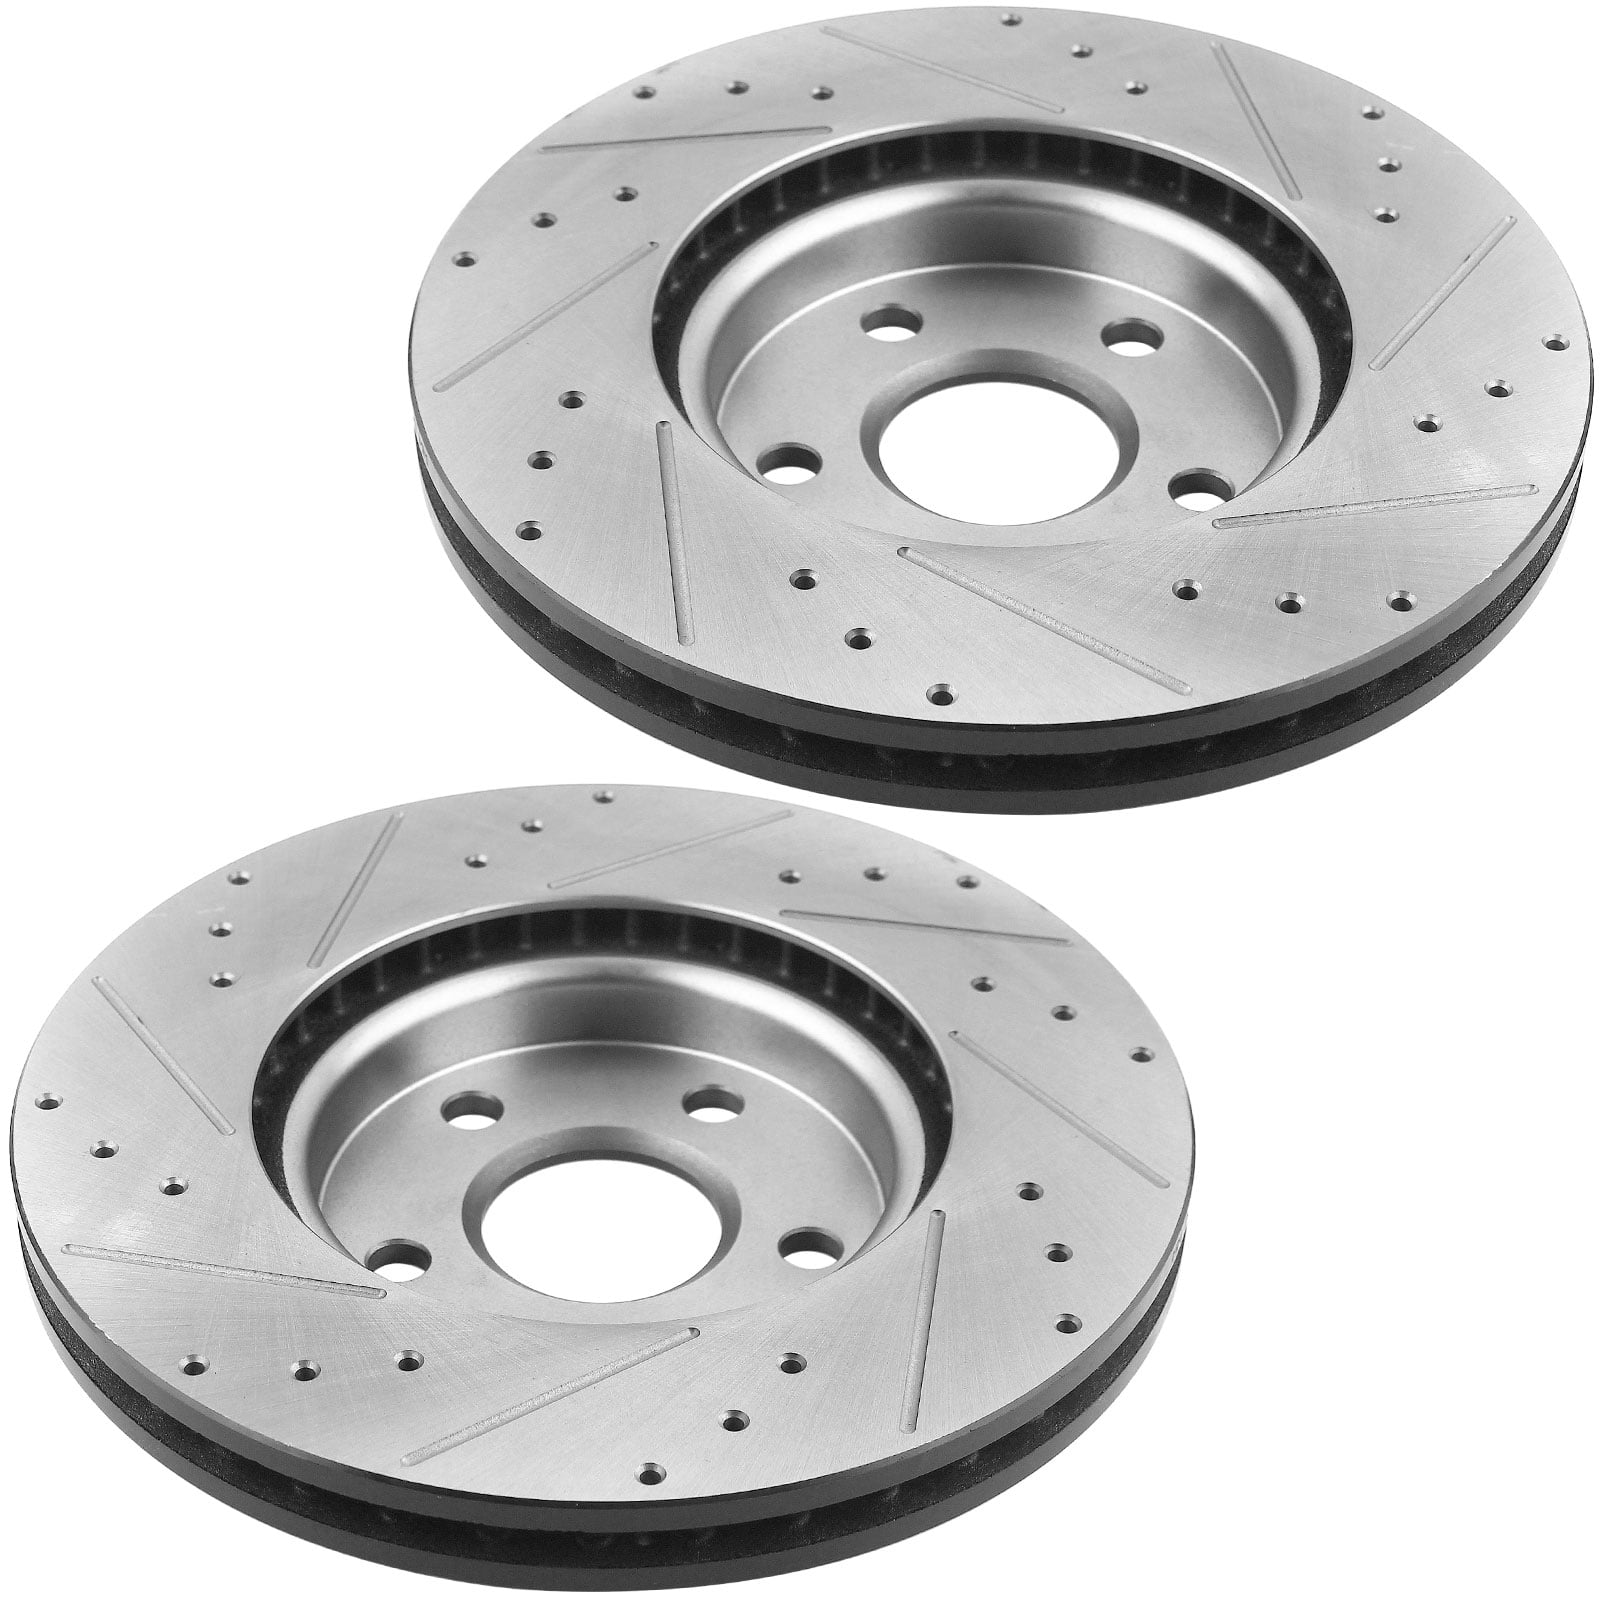 Brakes Rotors SCITOO 2pcs Front Drilled Slotted Discs Brake Rotors Brakes Kit for 2013-2016 Ford F-450 Super Duty 2013 2014 2015 2016 Ford F-250 Super Duty 2013-2016 Ford F-350 Super Duty 